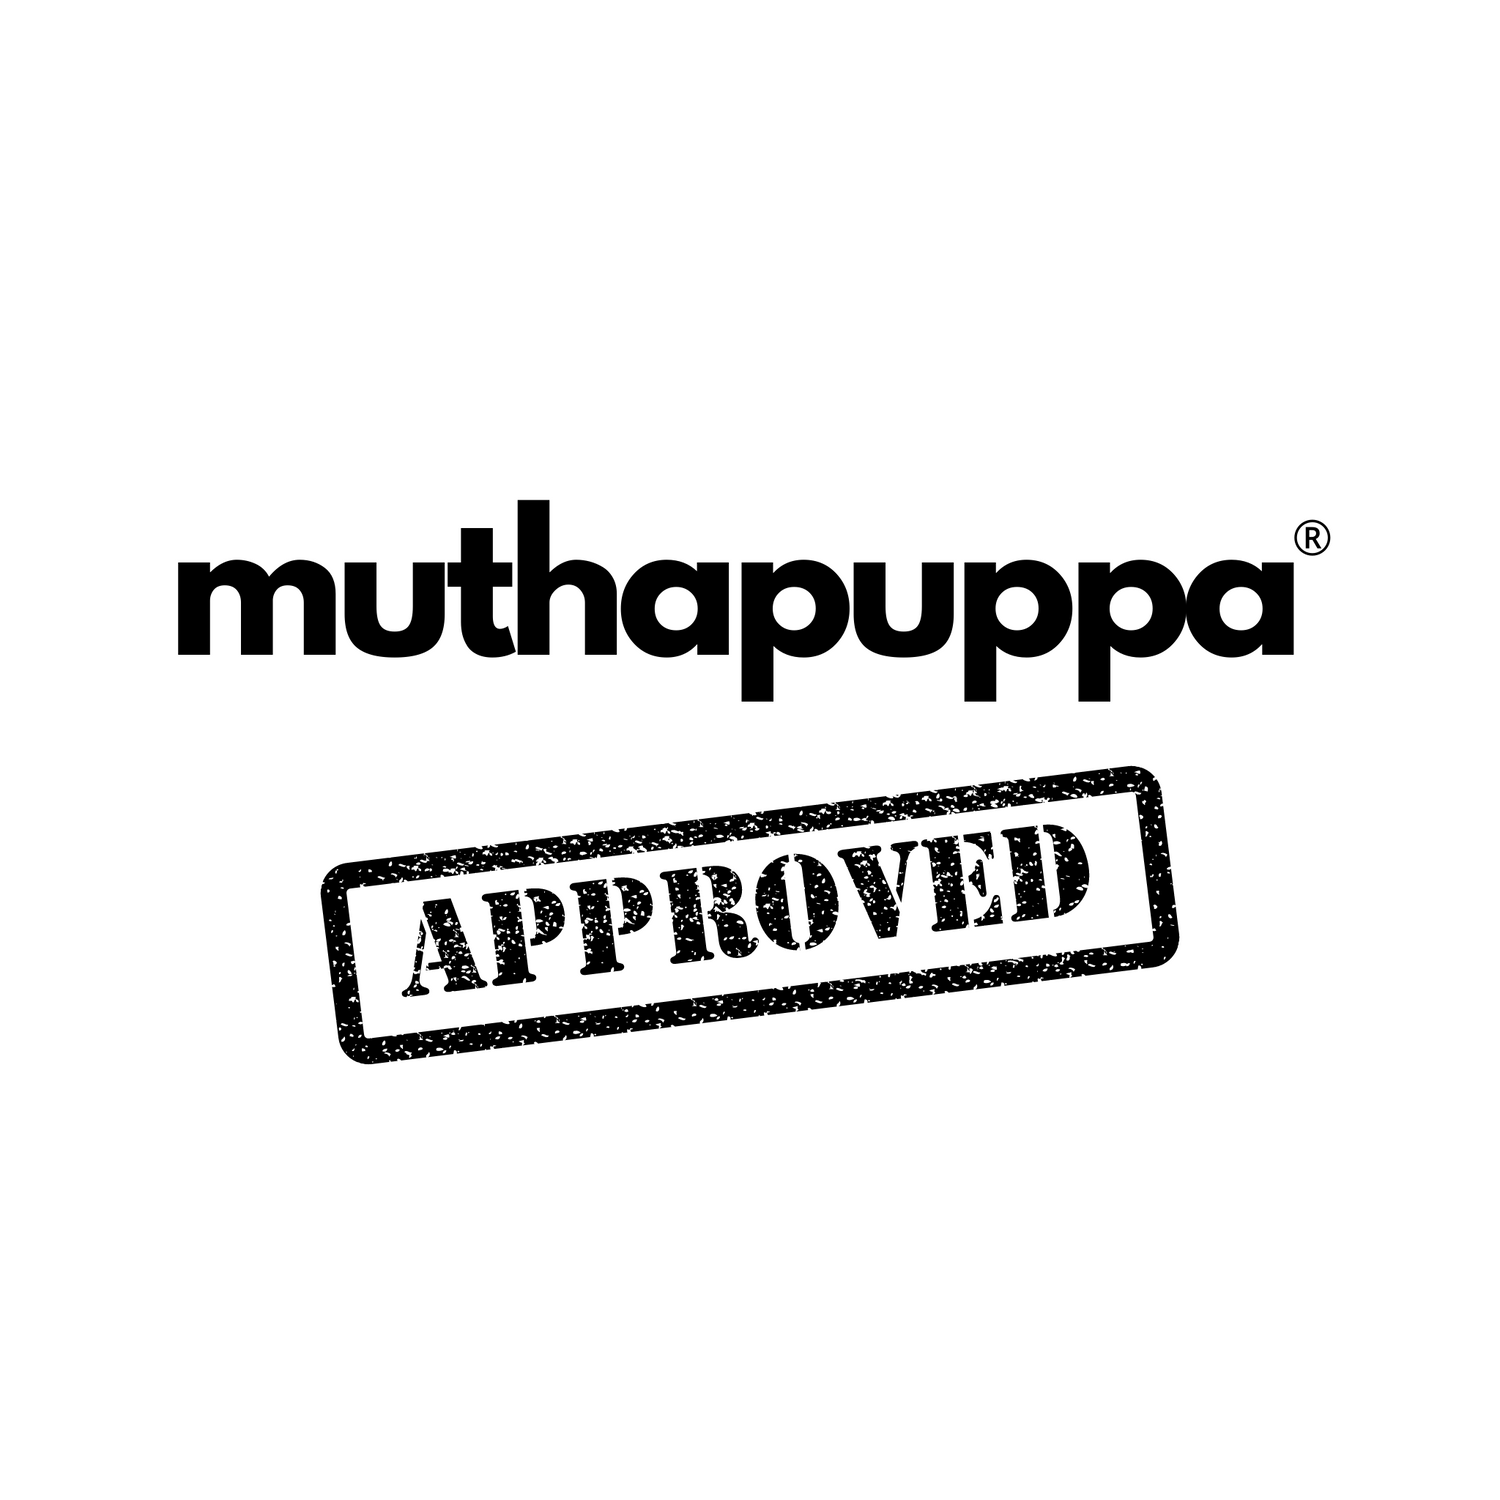 muthapuppa logo with an approved rubber stamp